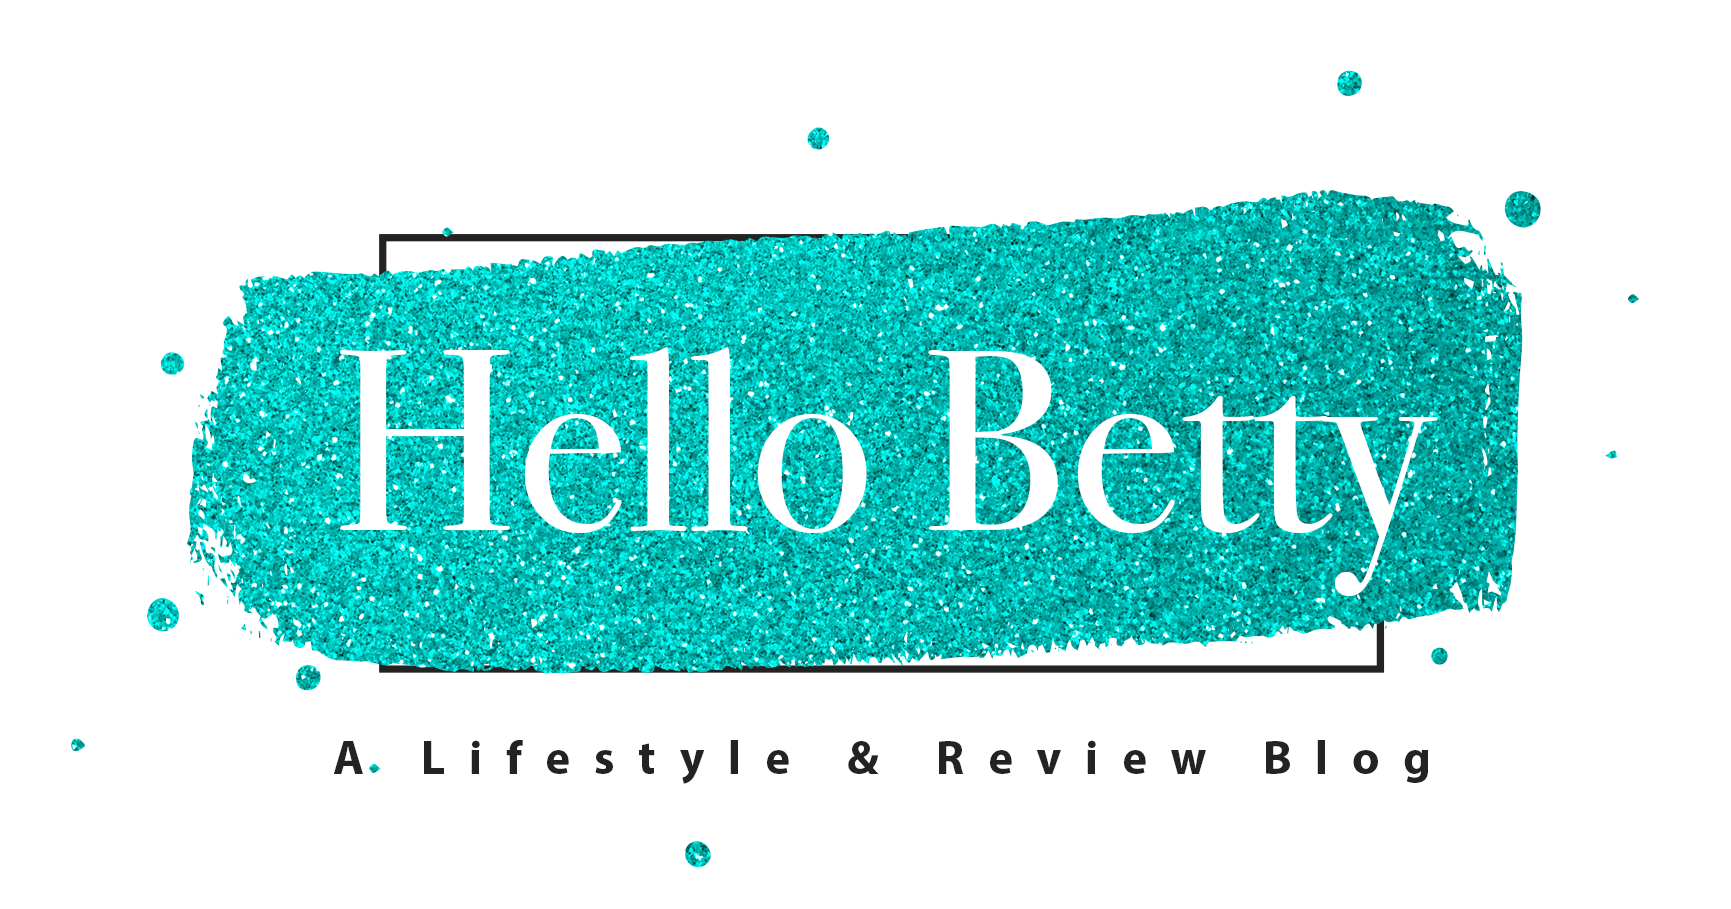 FEATURED: Cate & Chloe Takes the Spotlight on the Hello Betty Blog!